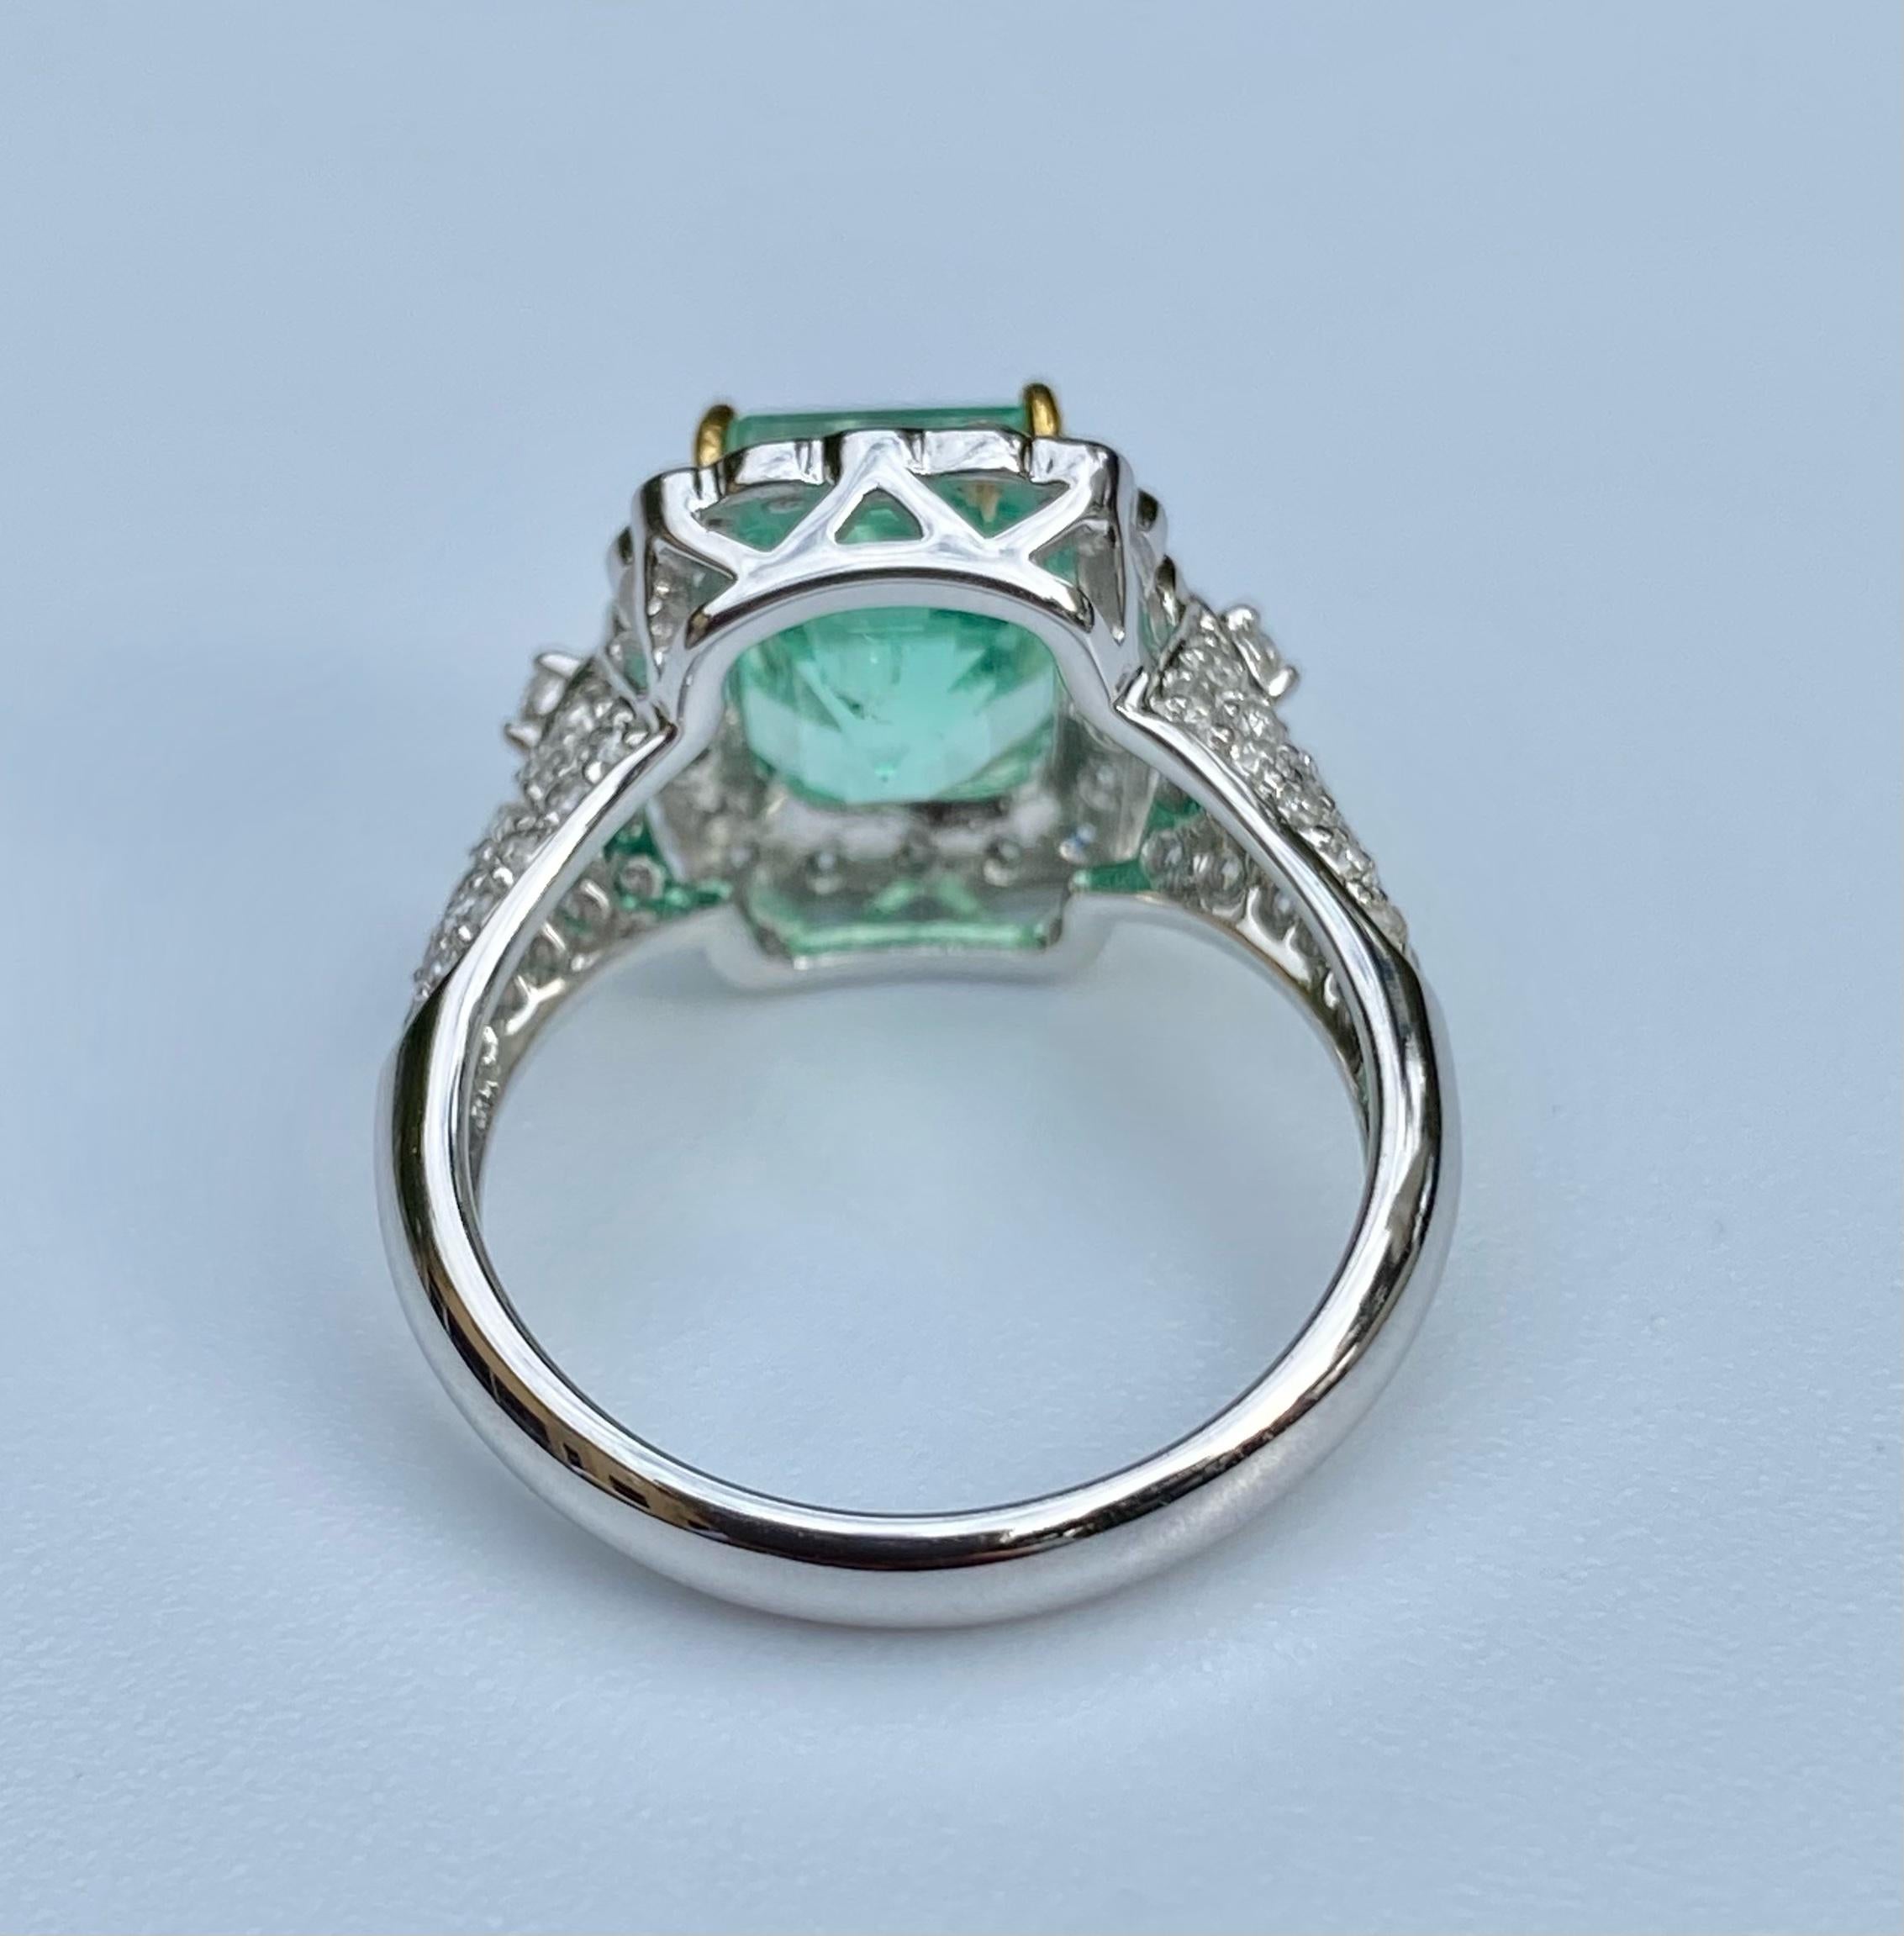 3.58 Carat Emerald-Cut Colombian Emerald in 18 Karat White Gold Ring For Sale 2